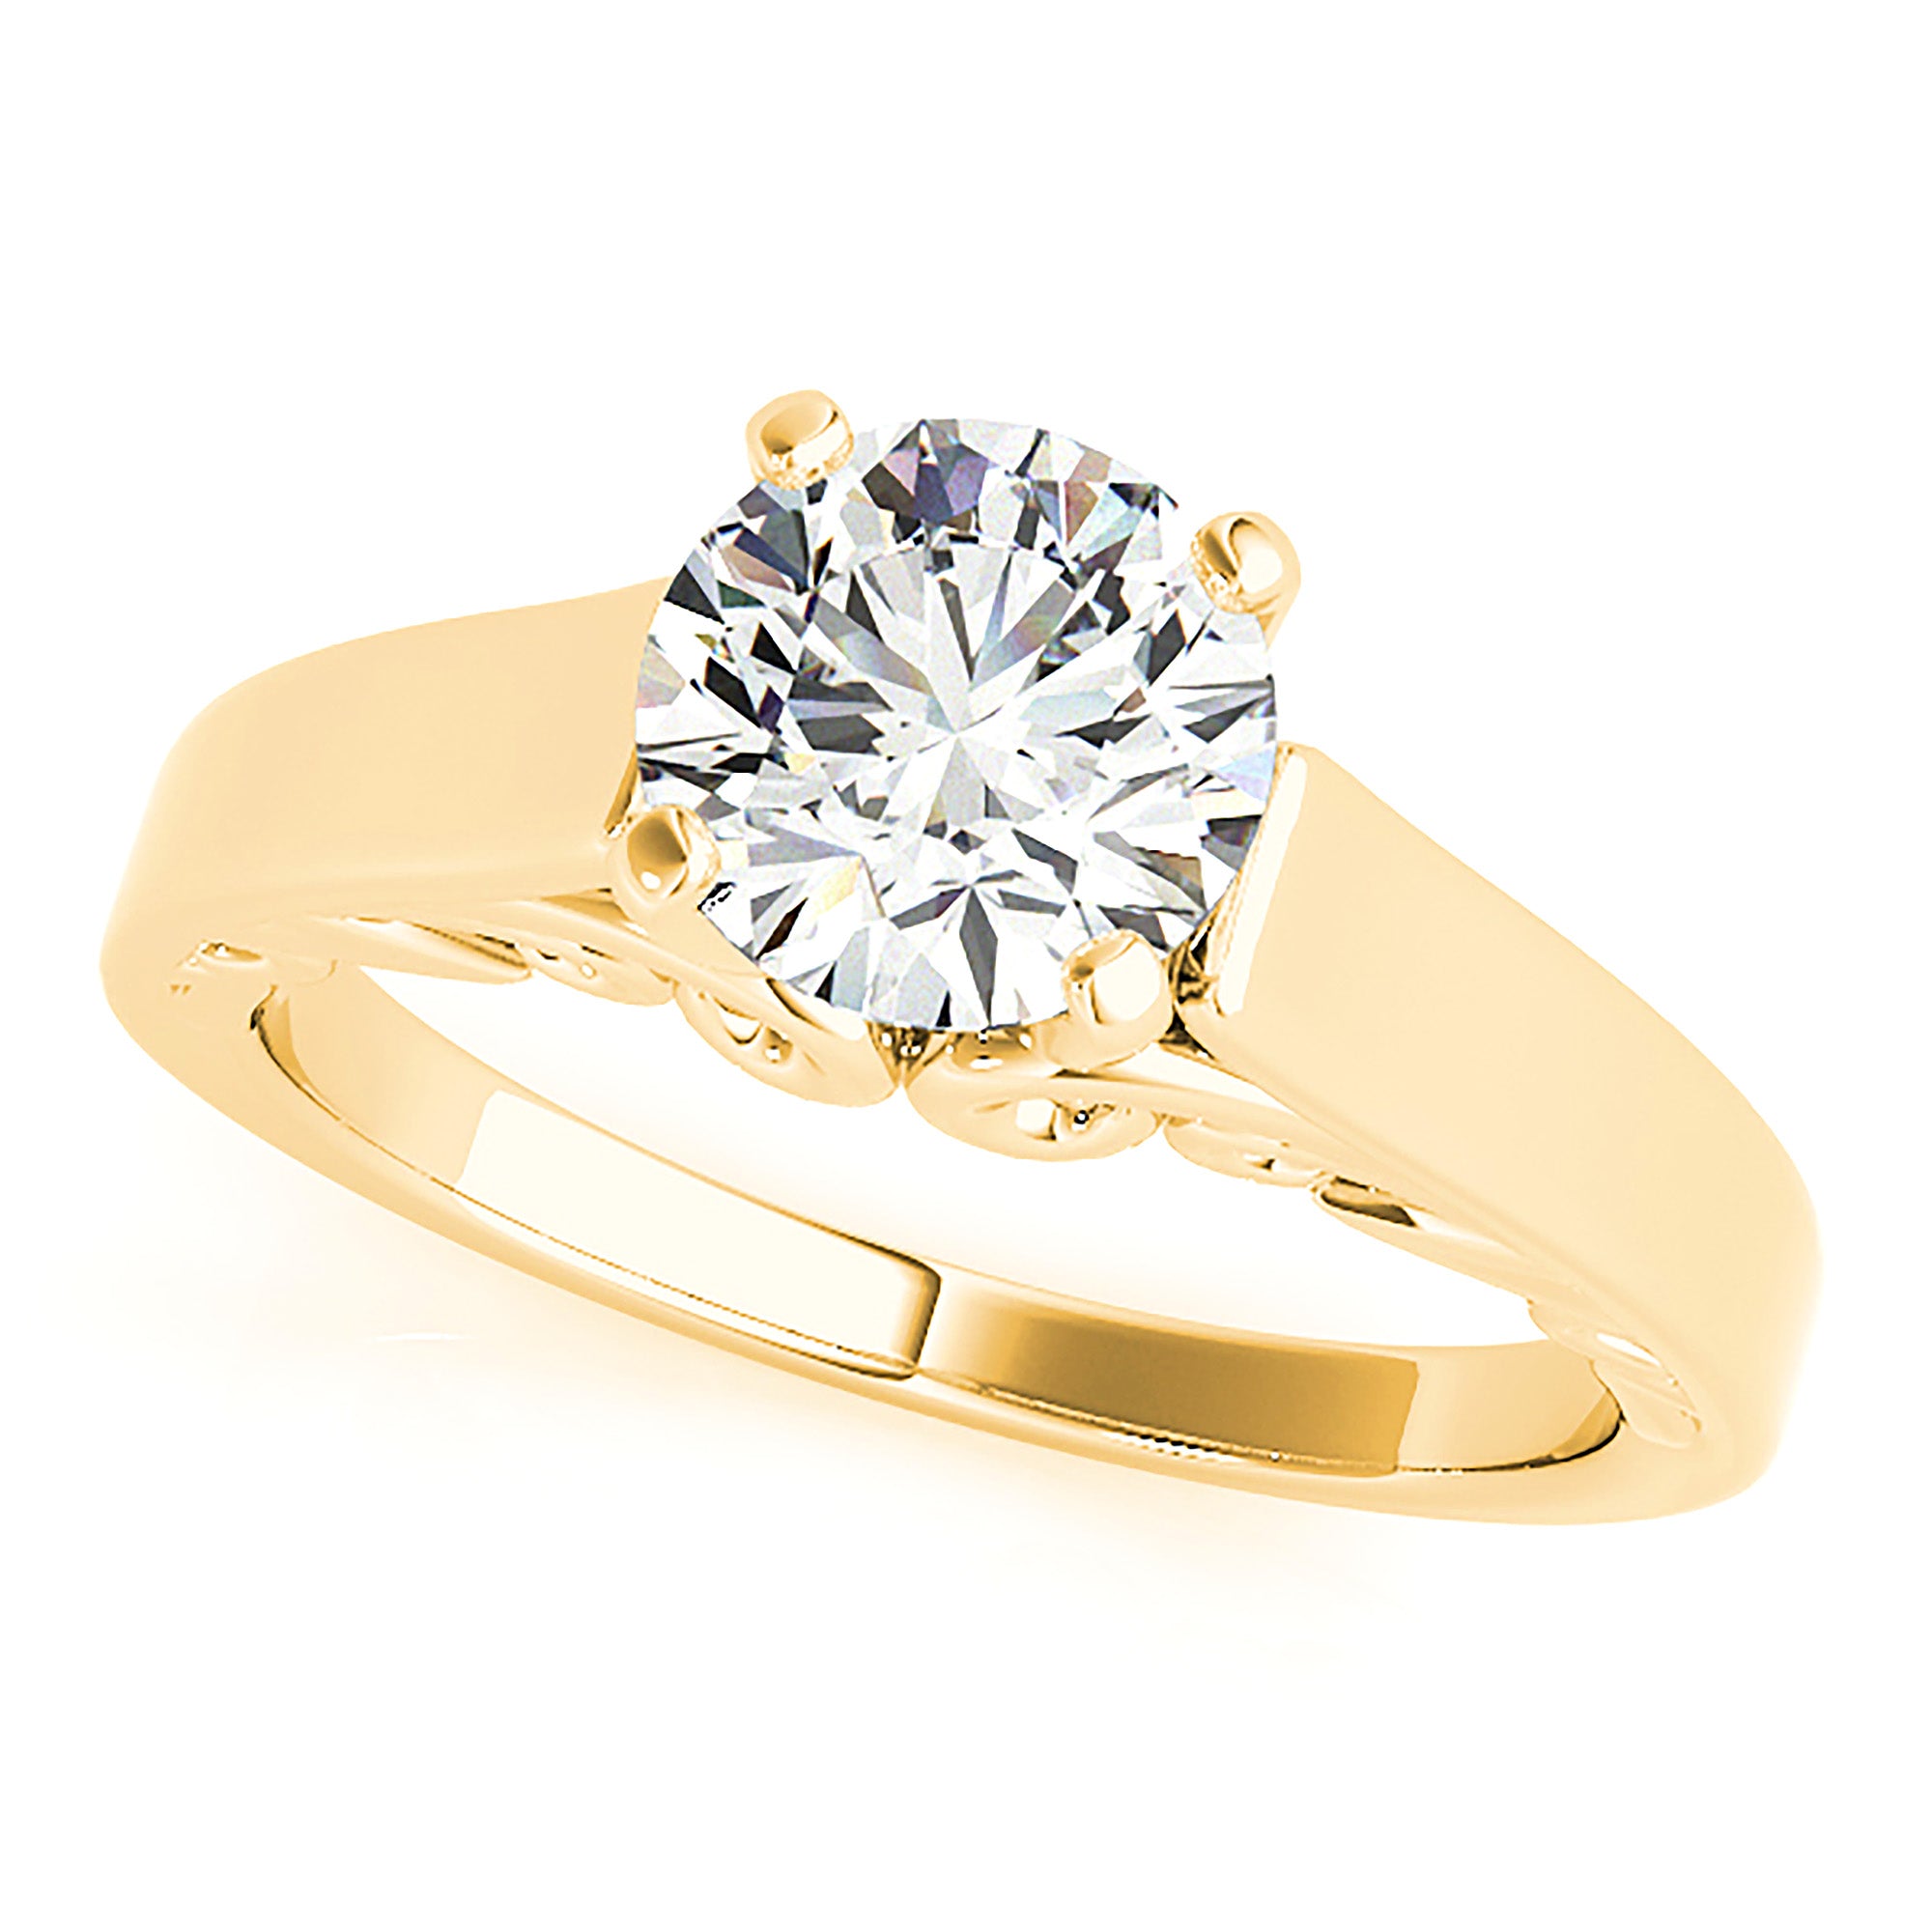 Vintage Inspired Solitaire Engagement Ring-in 14K/18K White, Yellow, Rose Gold and Platinum - Christmas Jewelry Gift -VIRABYANI